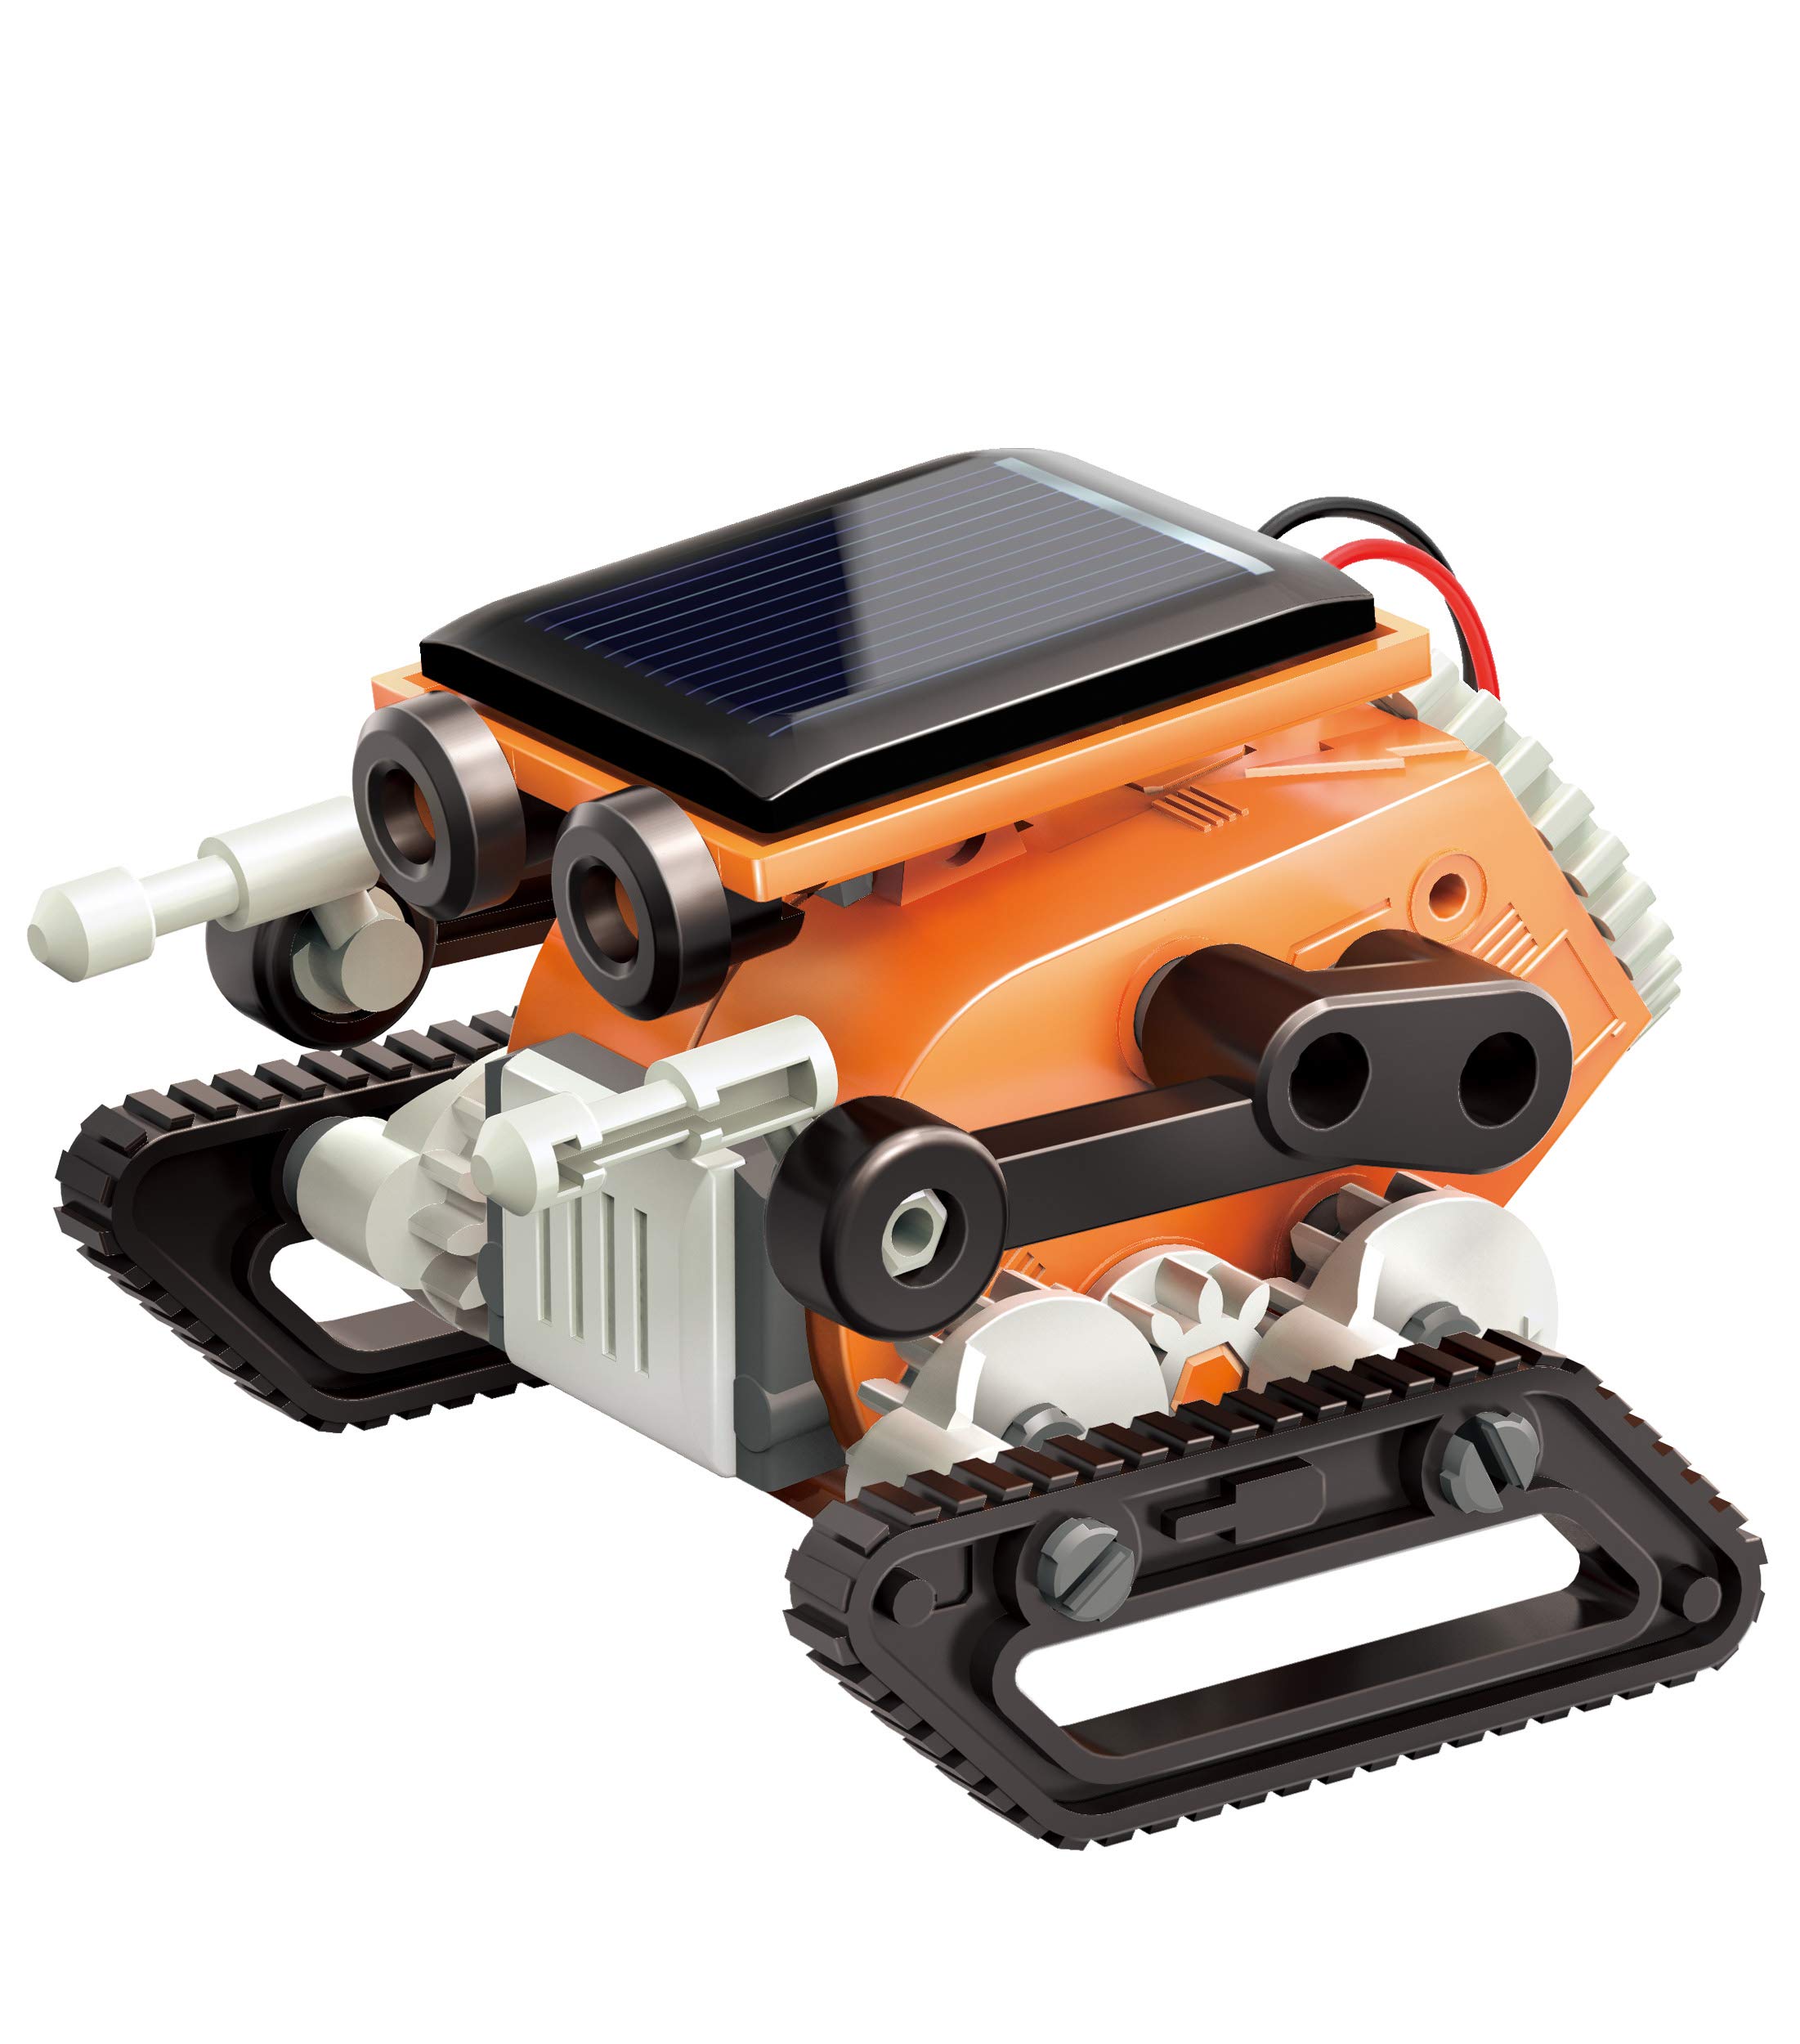 Thames & Kosmos SolarBots: 8-in-1 Solar Robot STEM Experiment Kit | Build 8 Cool Solar-Powered Robots in Minutes | No Batteries Required | Learn About Solar Energy & Technology | Solar Panel Included